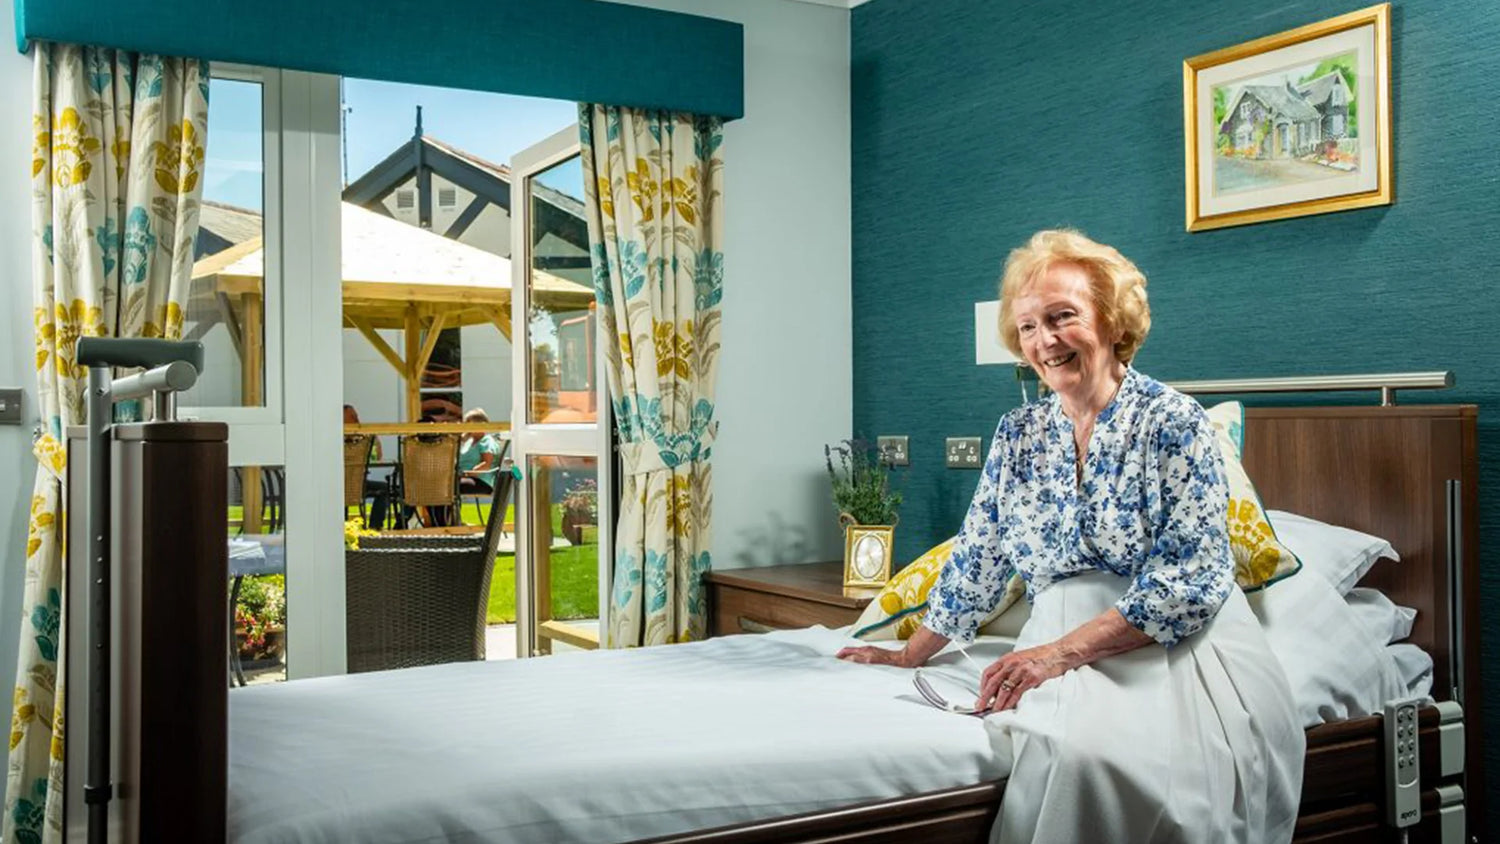 An older lady sat on a Opera profiling bed in a stylish care home.